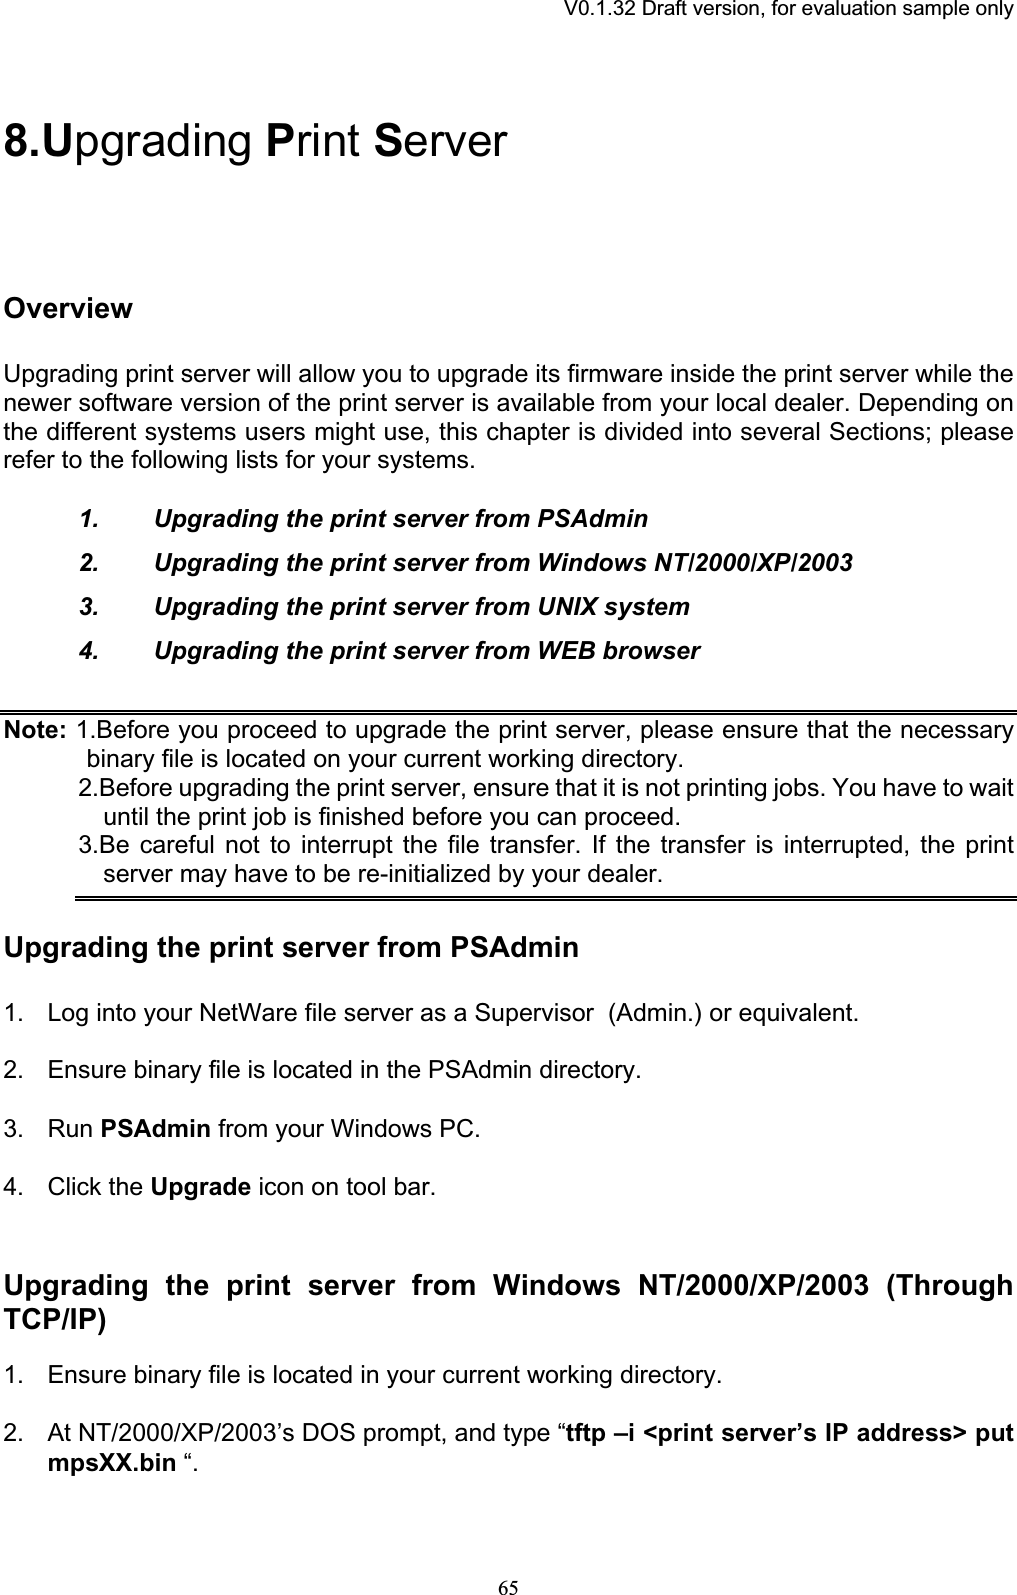 V0.1.32 Draft version, for evaluation sample only8.Upgrading Print ServerOverviewUpgrading print server will allow you to upgrade its firmware inside the print server while the newer software version of the print server is available from your local dealer. Depending on the different systems users might use, this chapter is divided into several Sections; please refer to the following lists for your systems. 1. Upgrading the print server from PSAdmin 2. Upgrading the print server from Windows NT/2000/XP/2003 3. Upgrading the print server from UNIX system 4. Upgrading the print server from WEB browser Note: 1.Before you proceed to upgrade the print server, please ensure that the necessary binary file is located on your current working directory. 2.Before upgrading the print server, ensure that it is not printing jobs. You have to wait until the print job is finished before you can proceed. 3.Be careful not to interrupt the file transfer. If the transfer is interrupted, the print server may have to be re-initialized by your dealer. Upgrading the print server from PSAdmin 1. Log into your NetWare file server as a Supervisor  (Admin.) or equivalent. 2. Ensure binary file is located in the PSAdmin directory. 3. Run PSAdmin from your Windows PC. 4. Click the Upgrade icon on tool bar. Upgrading the print server from Windows NT/2000/XP/2003 (Through TCP/IP)1. Ensure binary file is located in your current working directory. 2. At NT/2000/XP/2003’s DOS prompt, and type “tftp –i &lt;print server’s IP address&gt; putmpsXX.bin “. 65